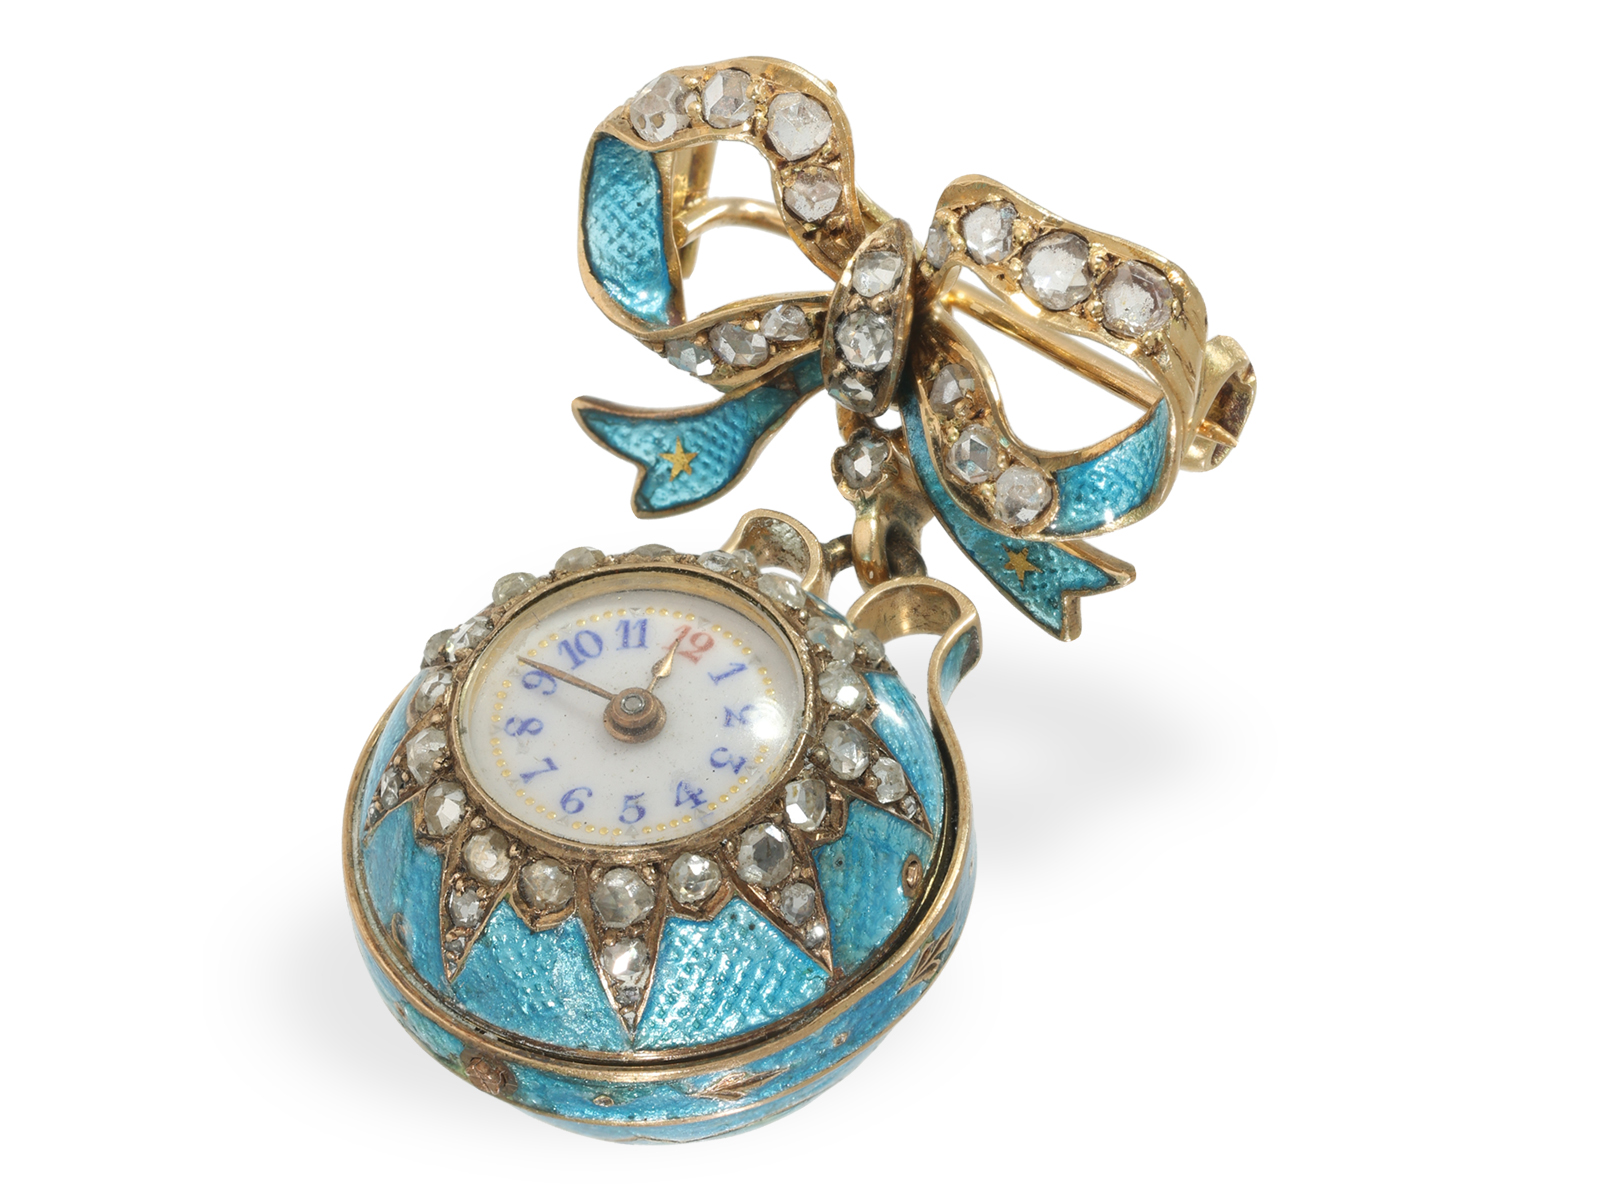 Pendant watch: gold/enamel form watch "Boule de Geneve" with original brooch and diamond setting, ca - Image 4 of 5